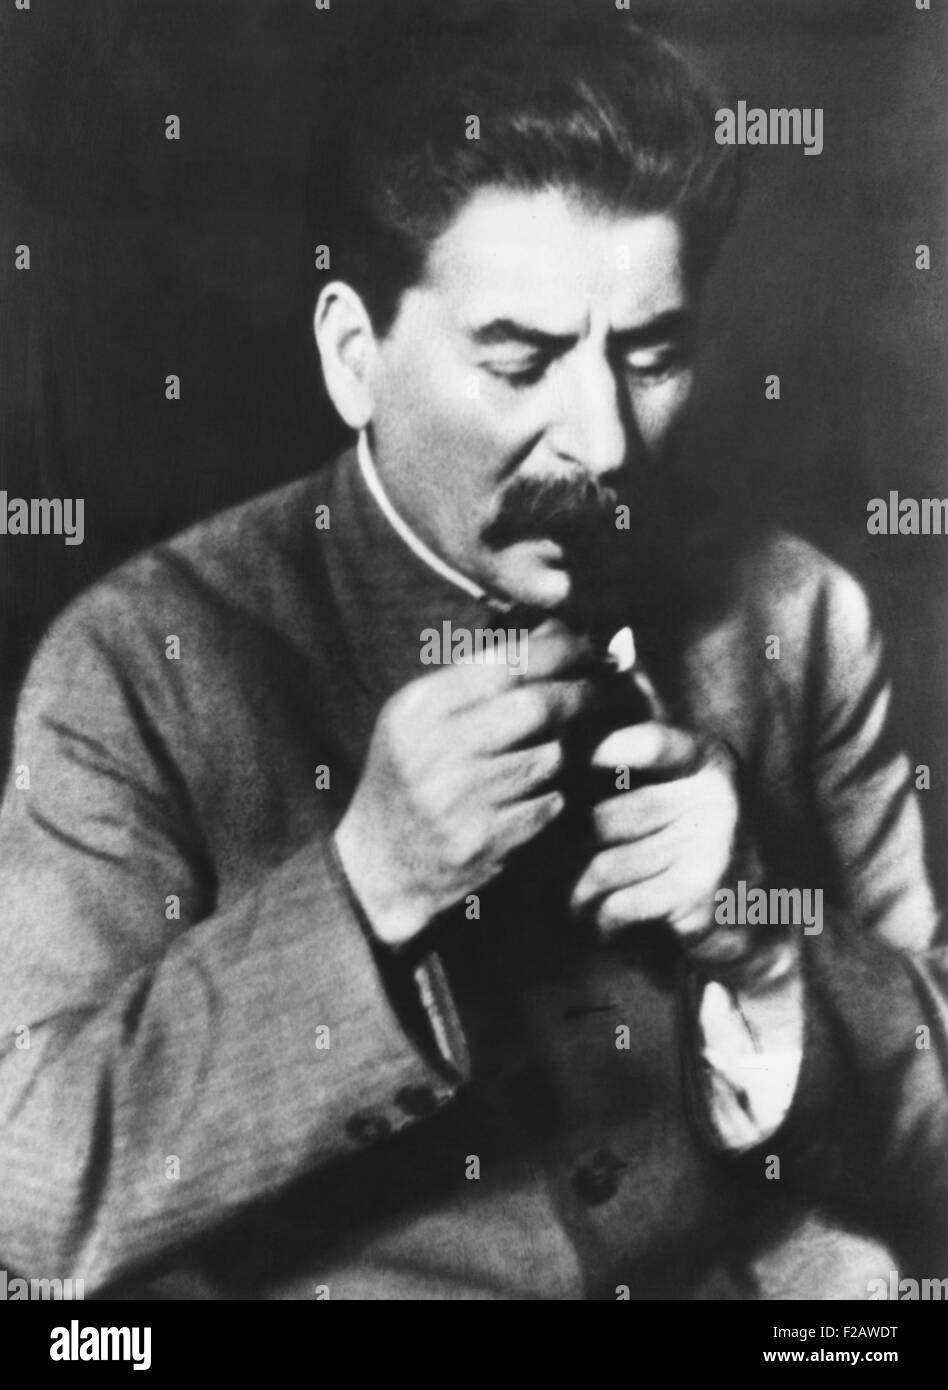 Josef Stalin head of the Communist Party of the Soviet Union lighting his pipe. May 10, 1935. (CSU 2015 11 1378) Stock Photo